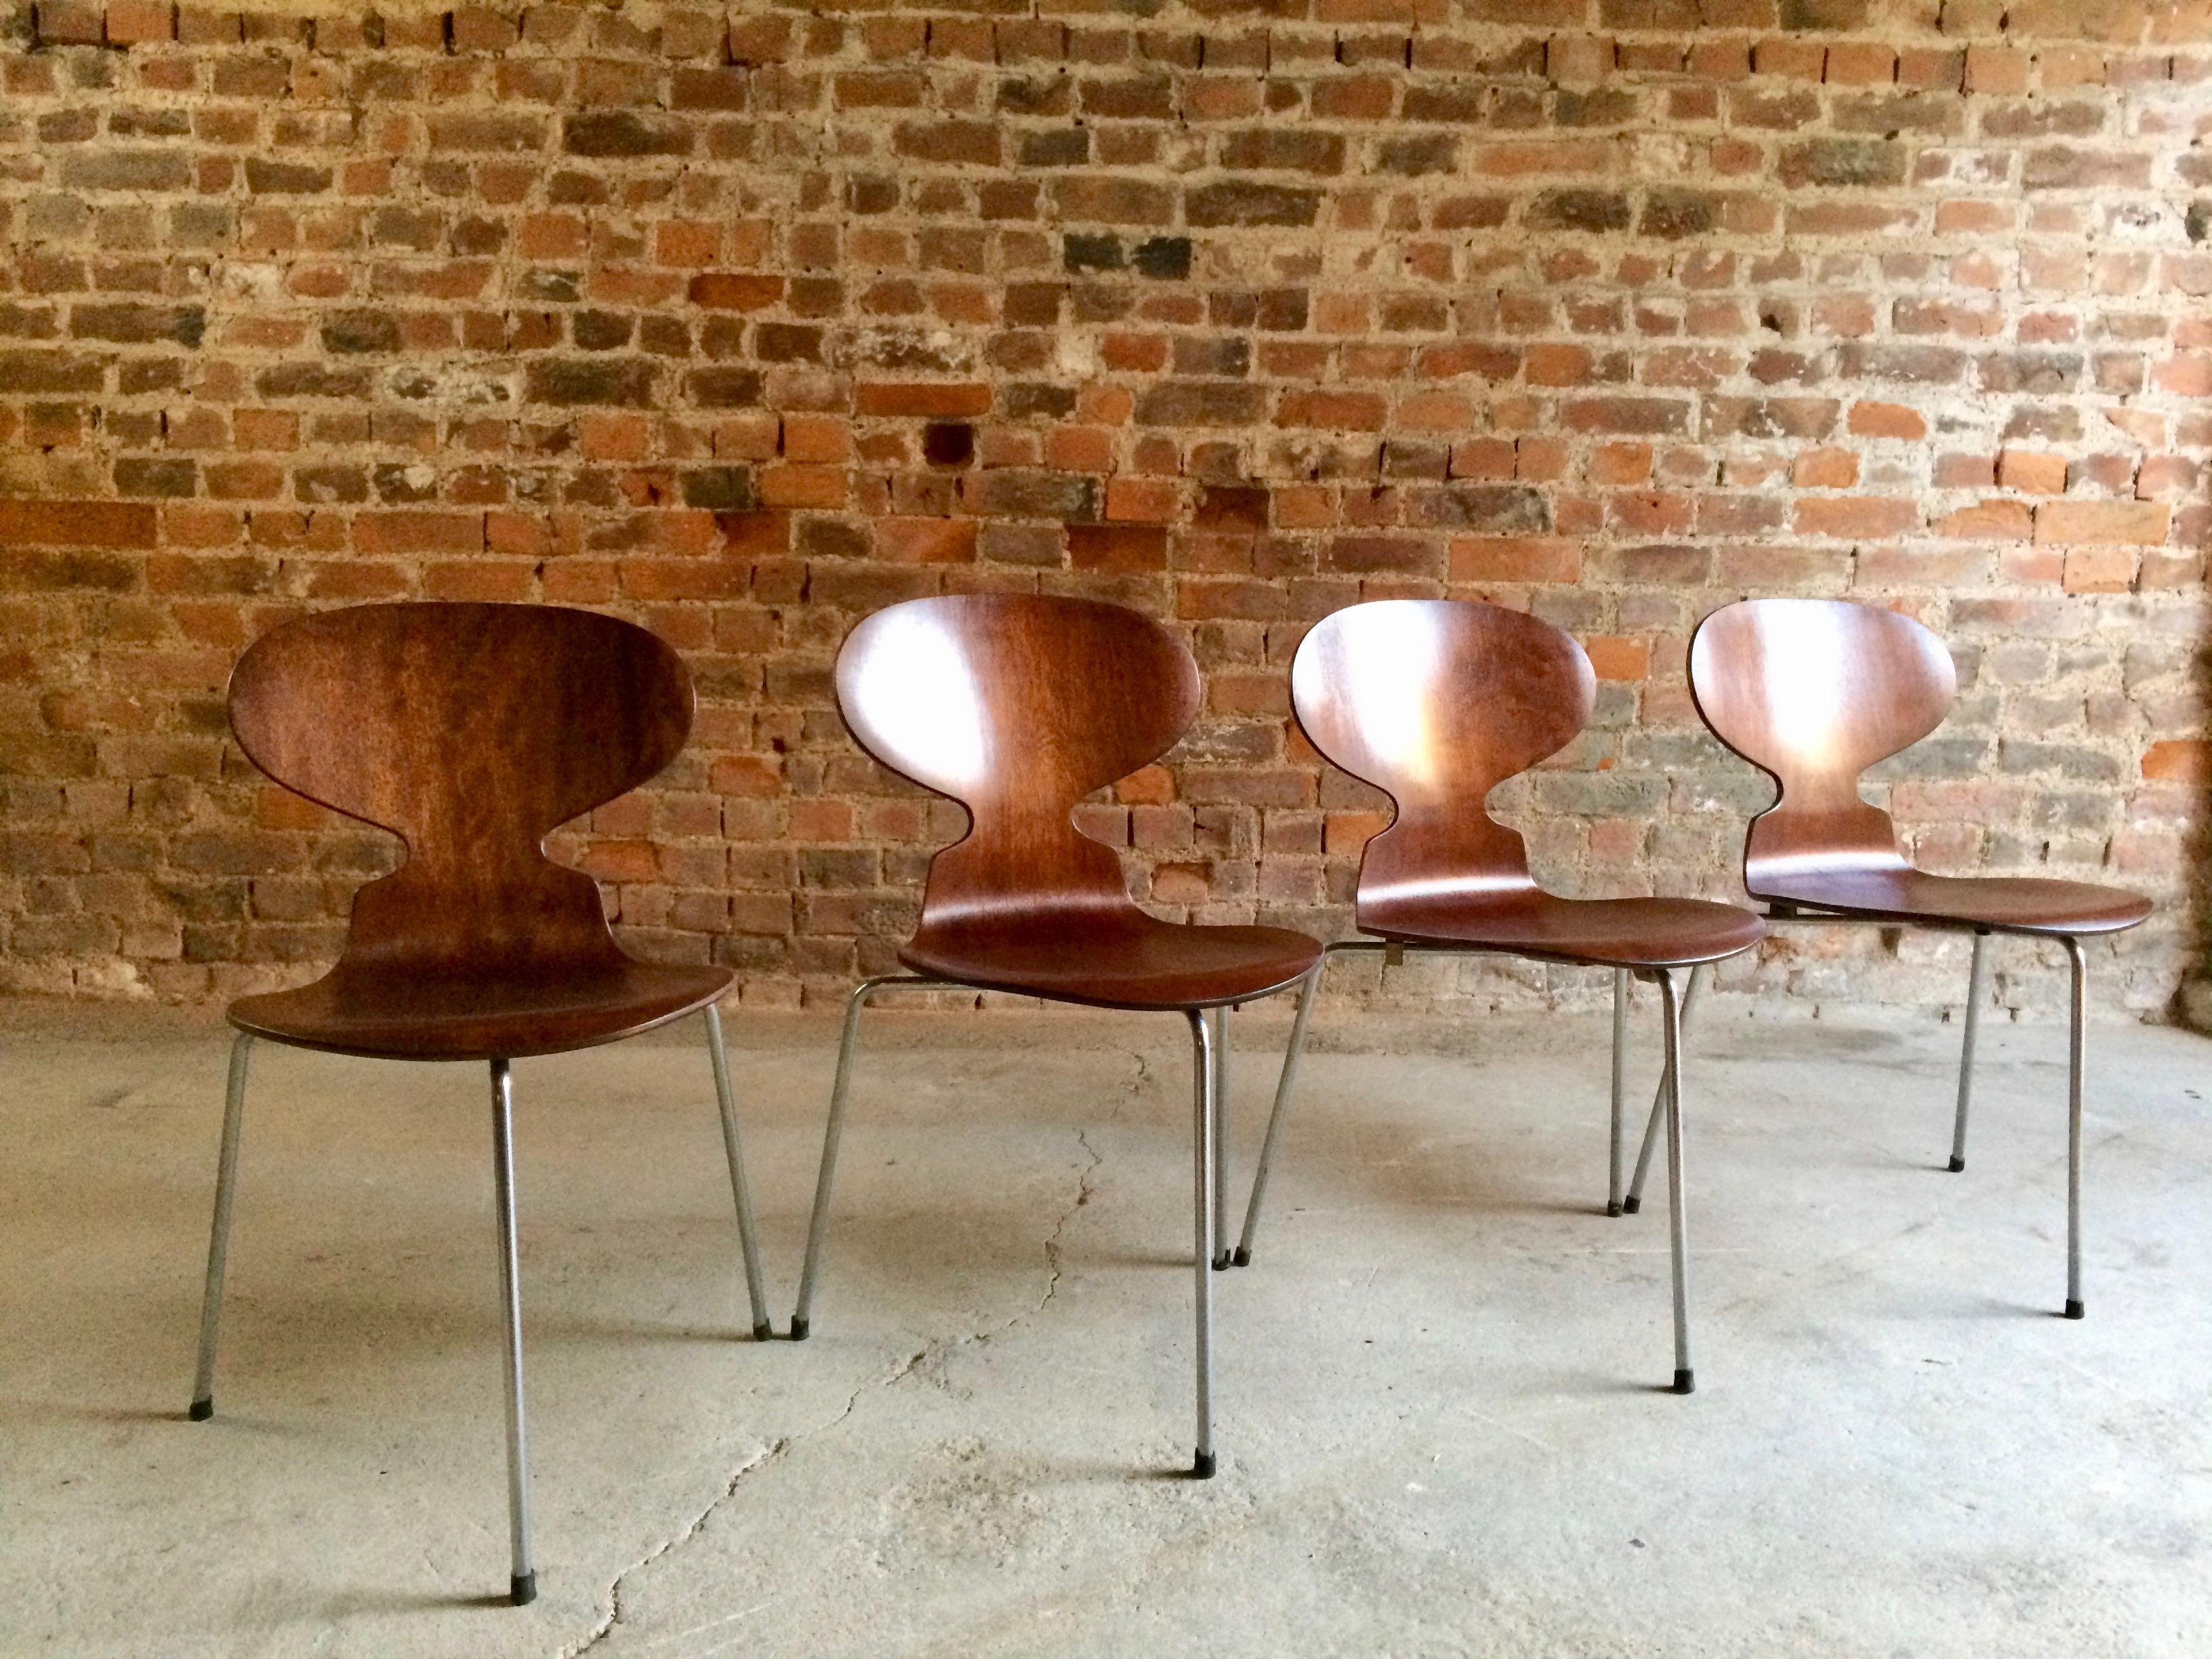 Arne Jacobsen Table and Four Ant Chairs Danish 1950s Midcentury Fritz Hansen In Good Condition In Longdon, Tewkesbury